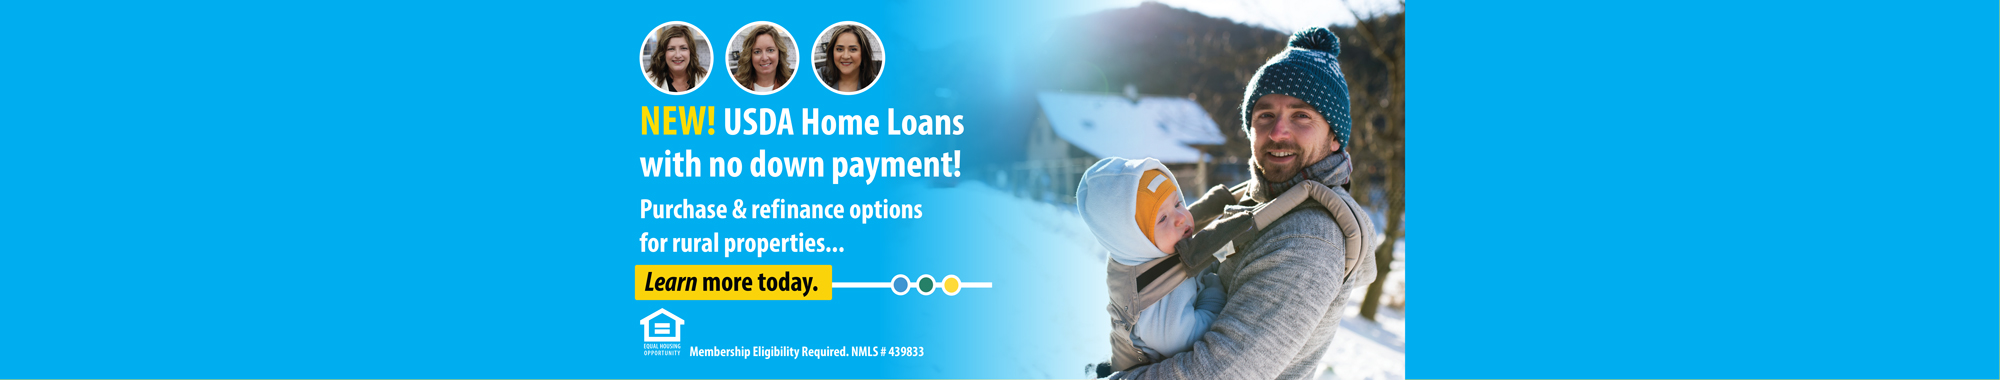 USDA Home Loans with no down payment. Learn more.